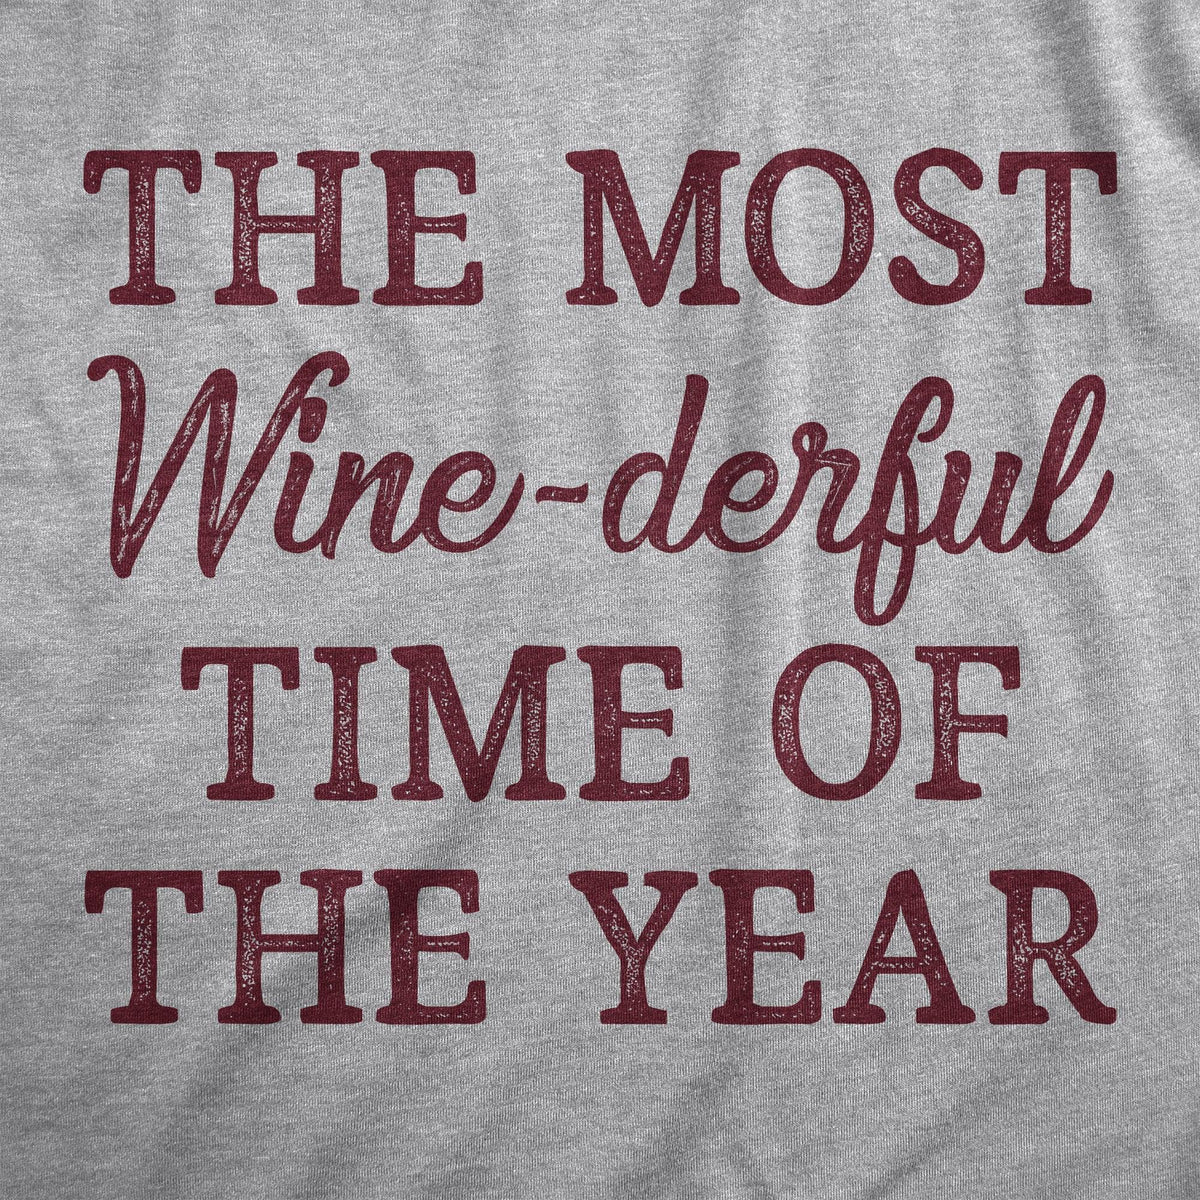 The Most Winederful Time Of The Year Men&#39;s Tshirt  -  Crazy Dog T-Shirts